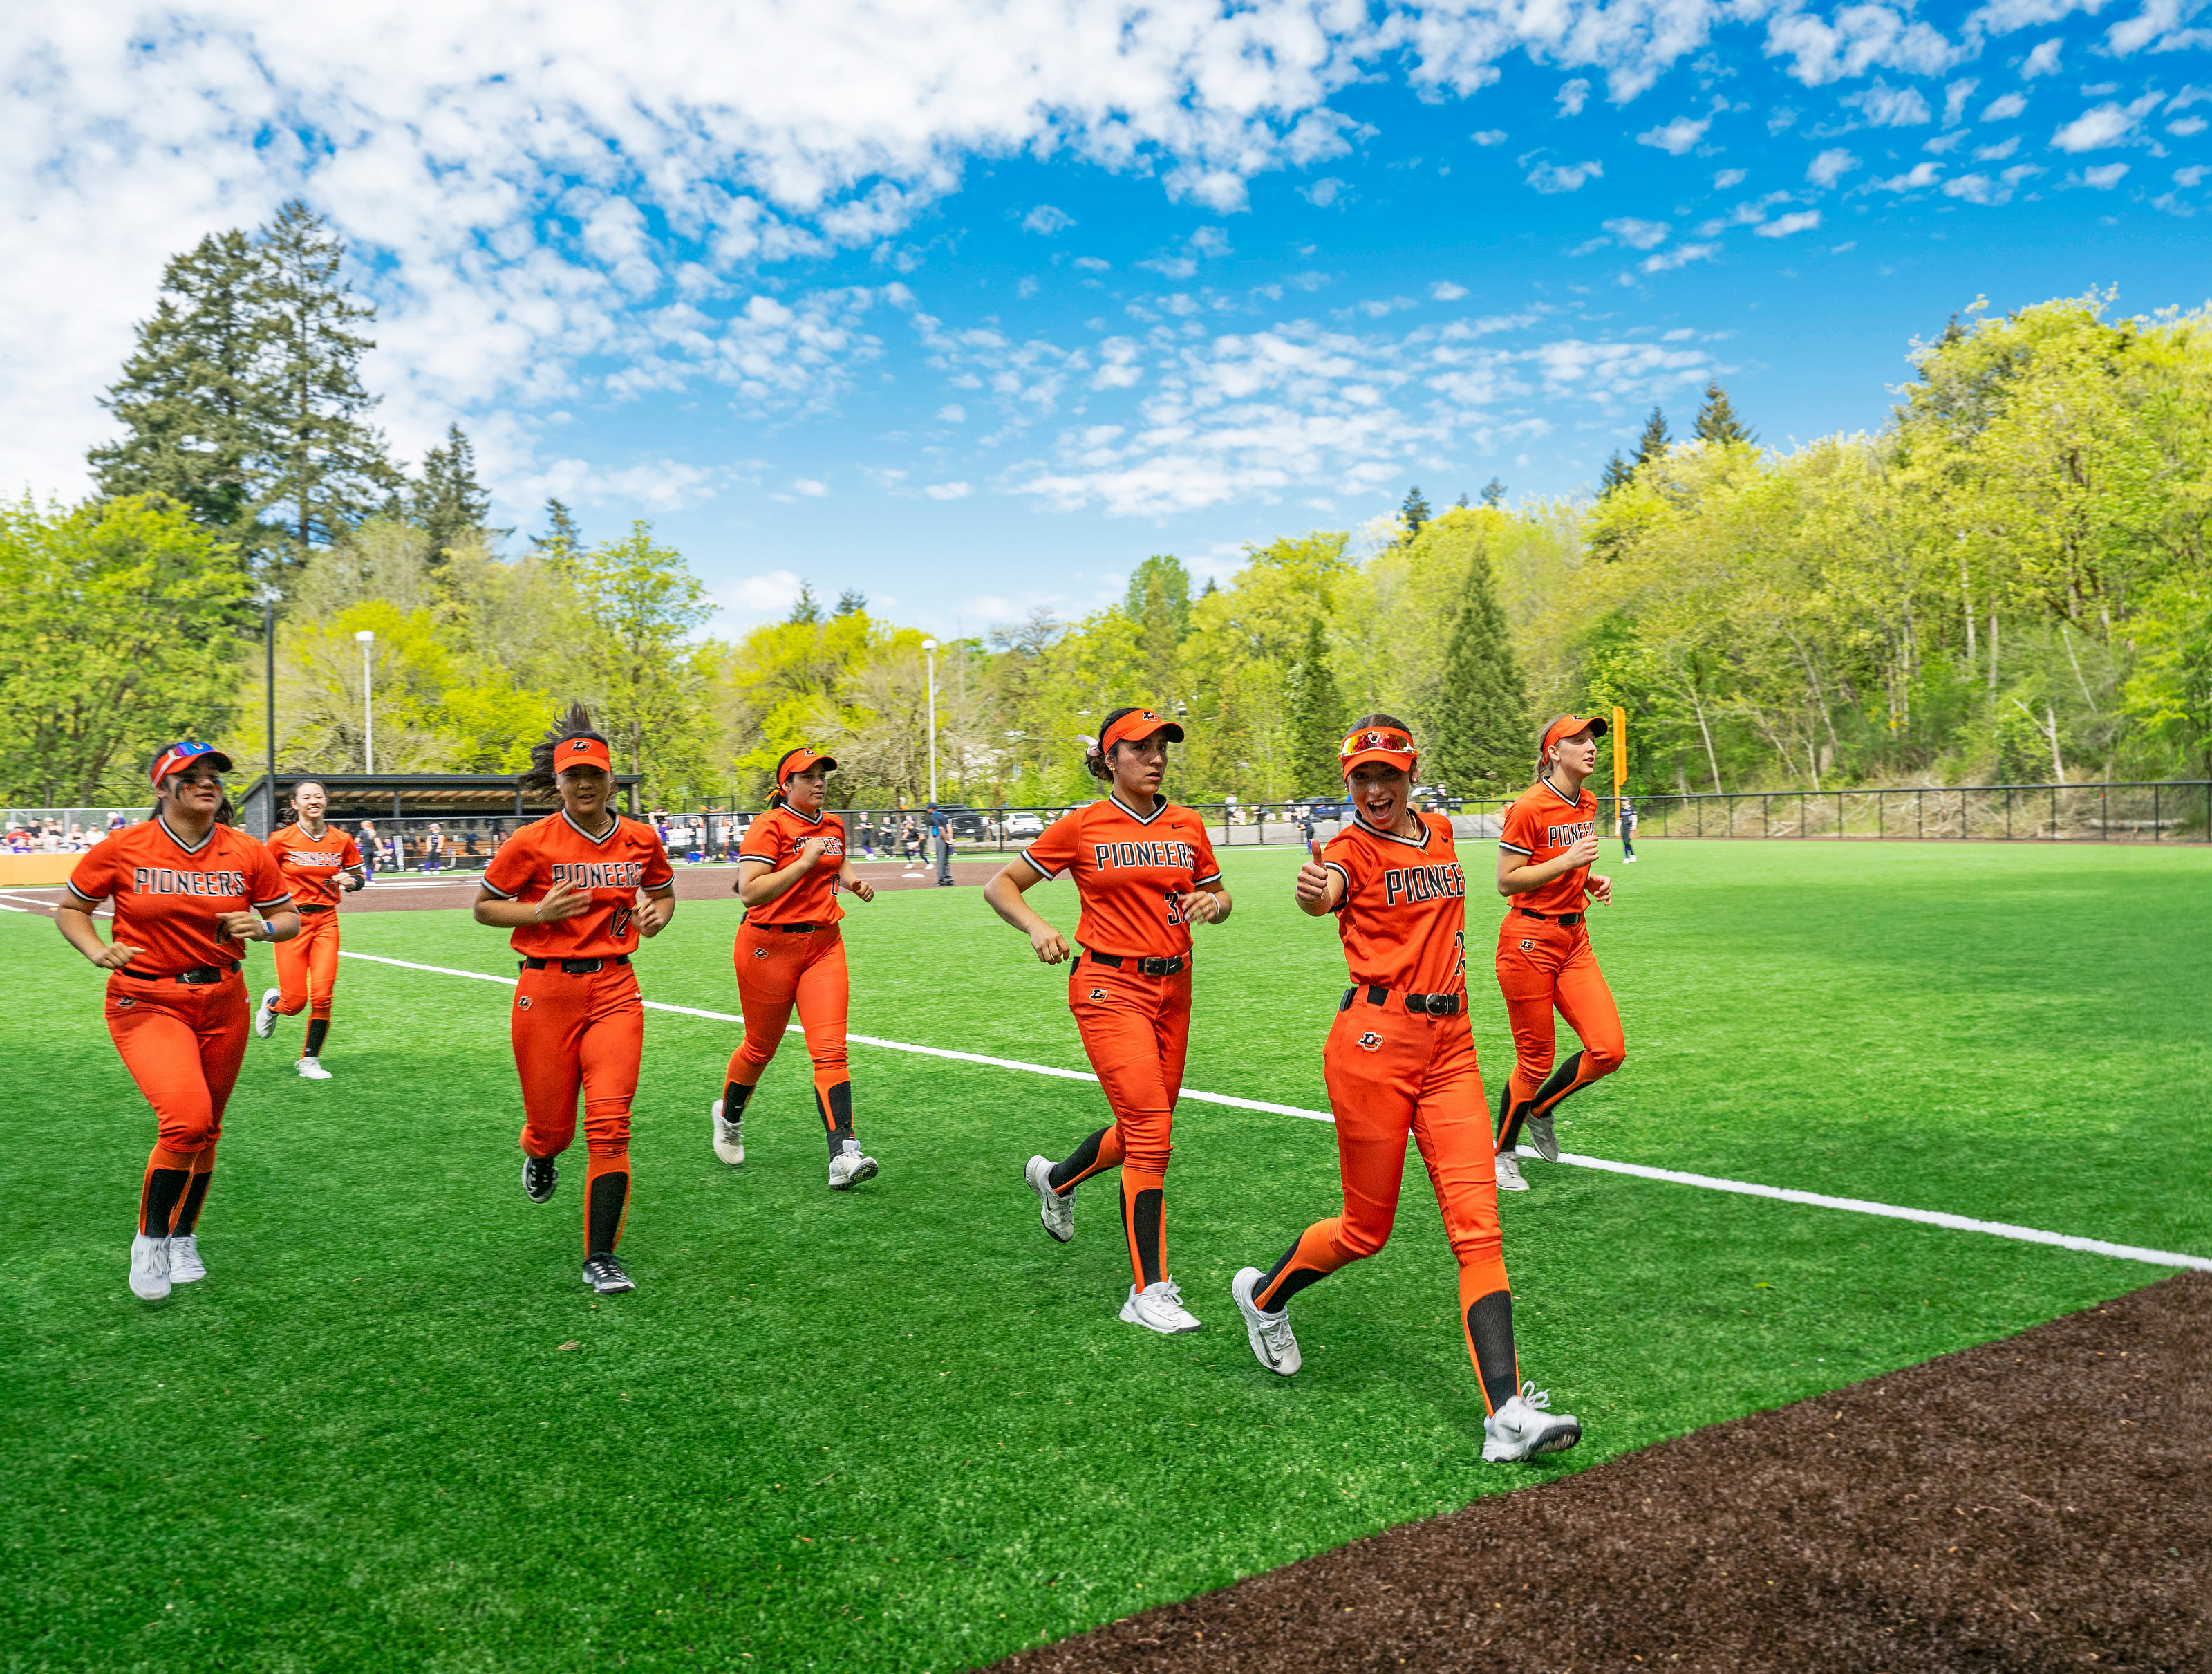    A Home Run for Student-Athletes     Lewis & Clark's softball team has enjoyed an outstanding season, winning the most games i...